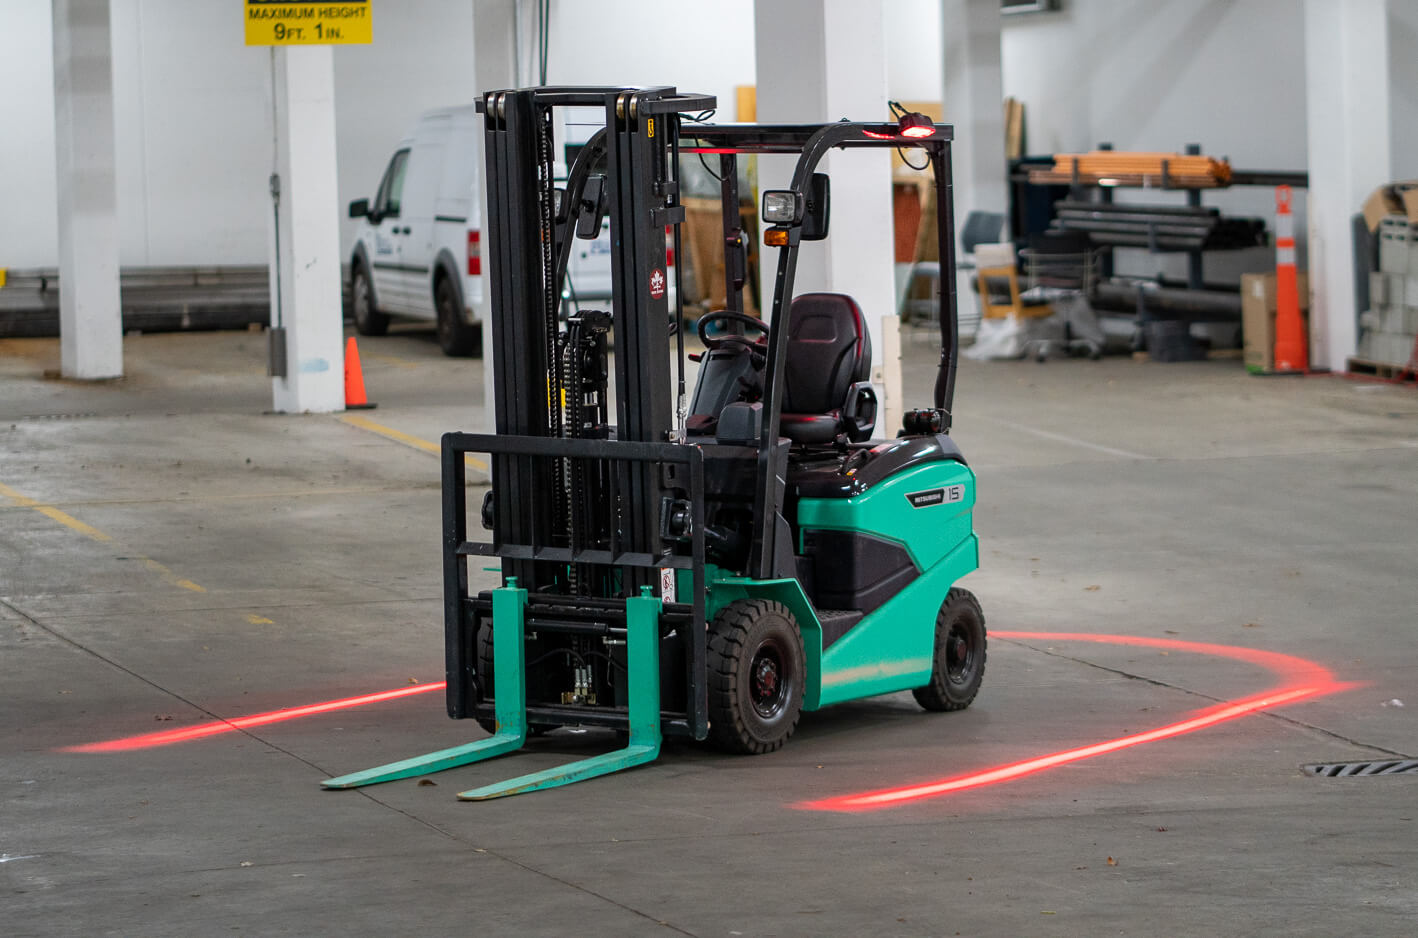 Green forklift in a warehouse surrounded by a horseshoe of red HALO light 